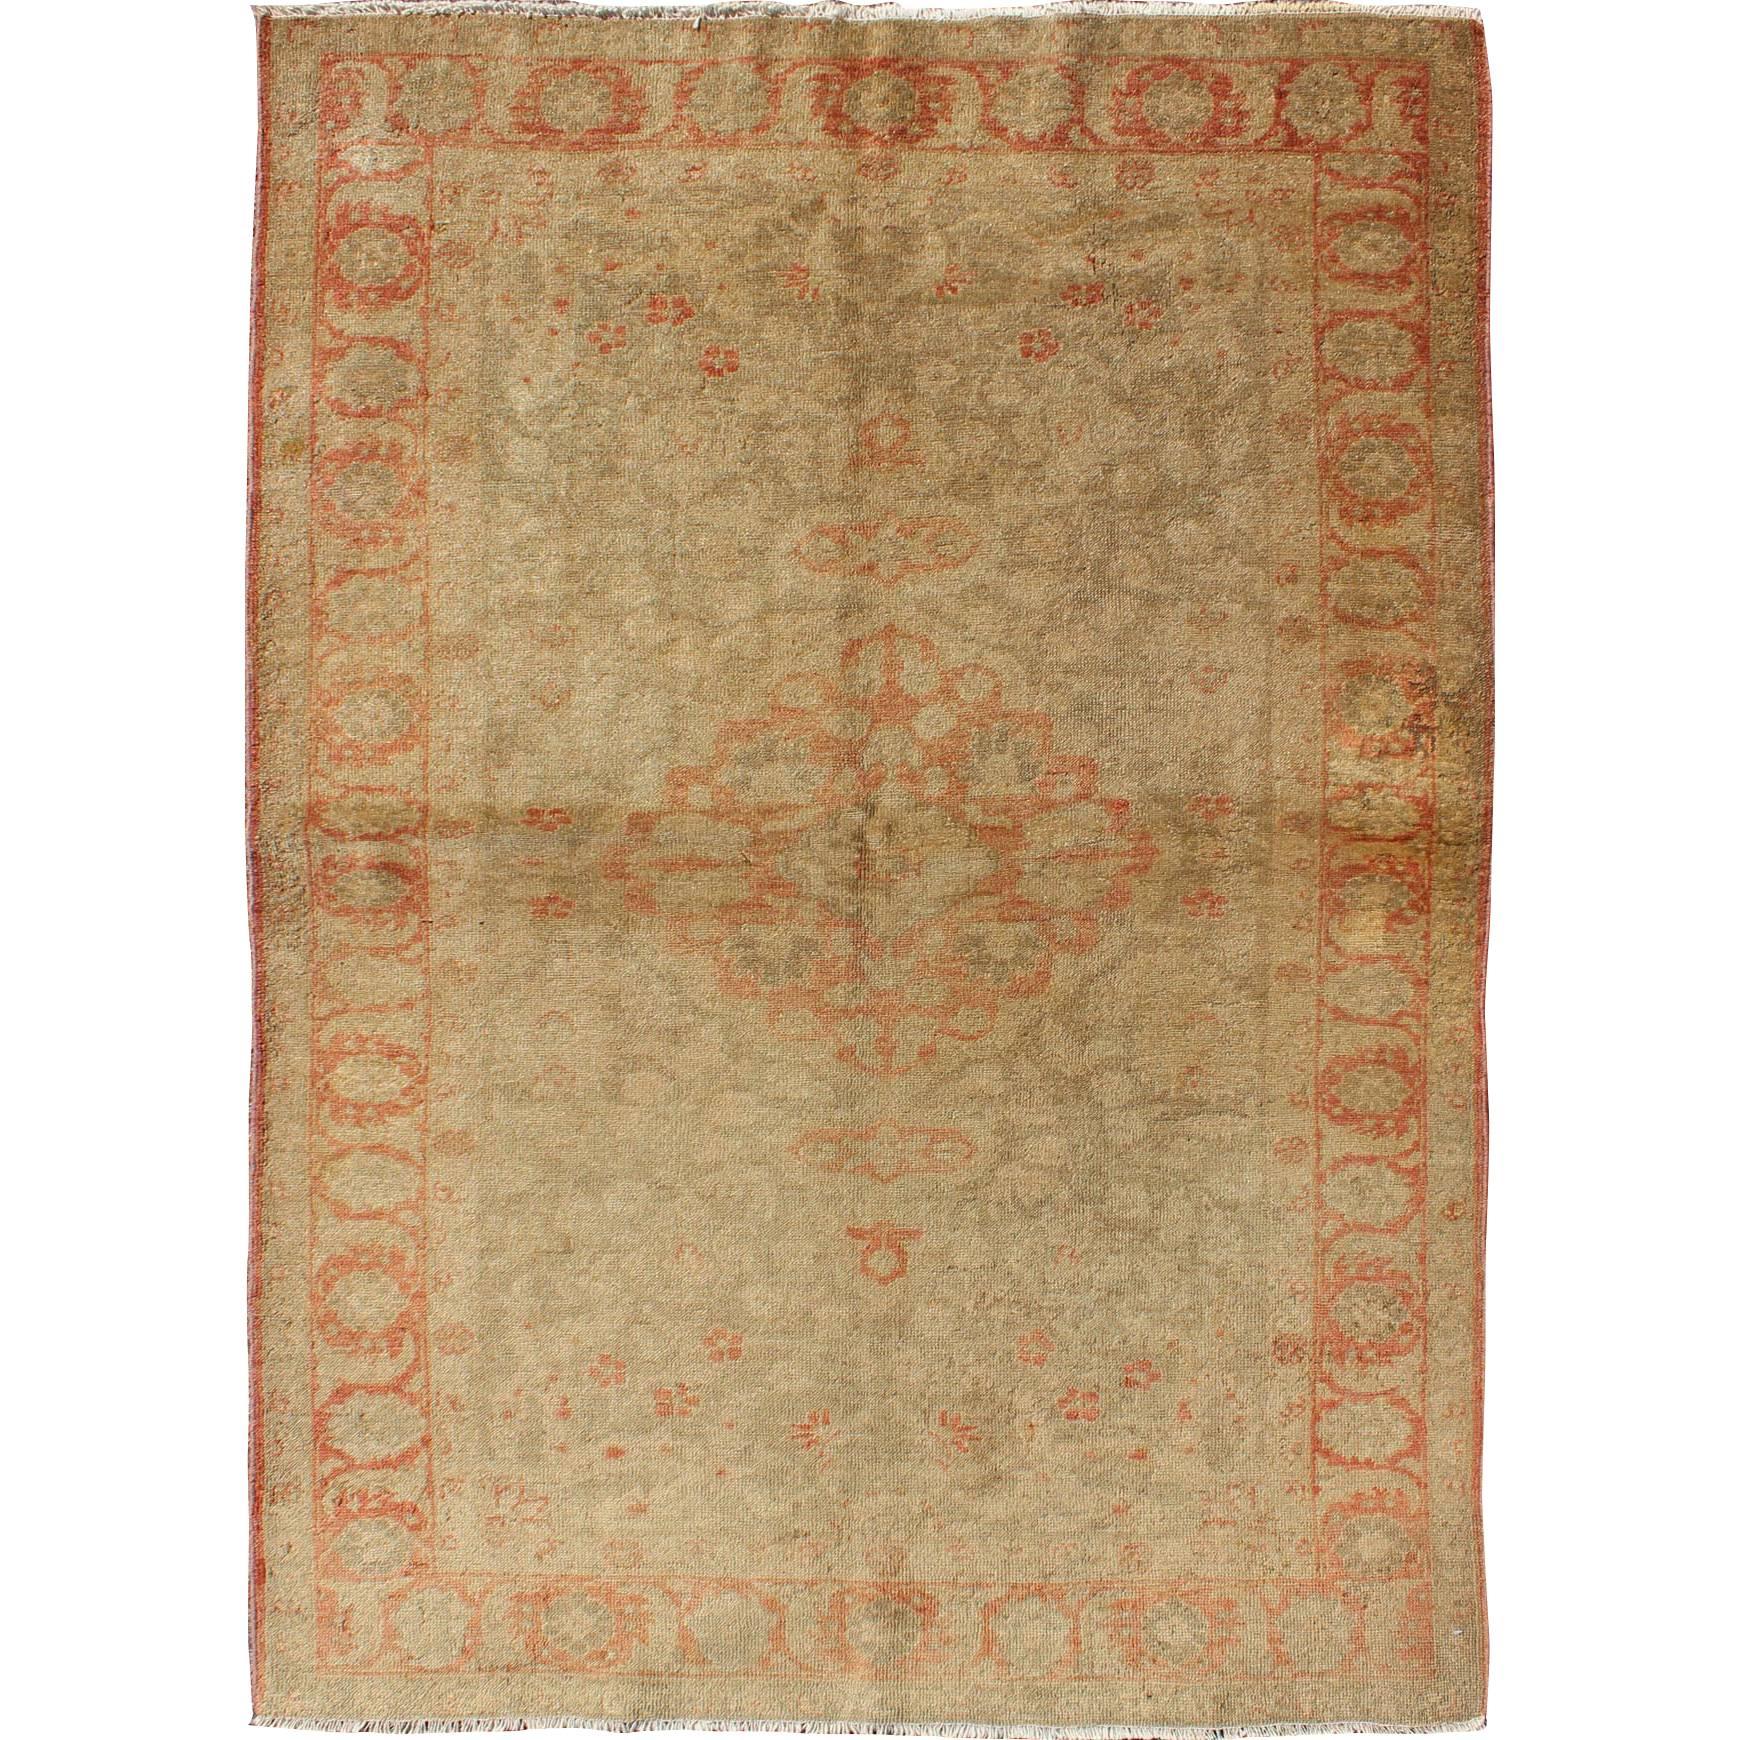 Muted Fine-Weave Sivas Rug with Botanical and Floral Elements in Red & Tan For Sale